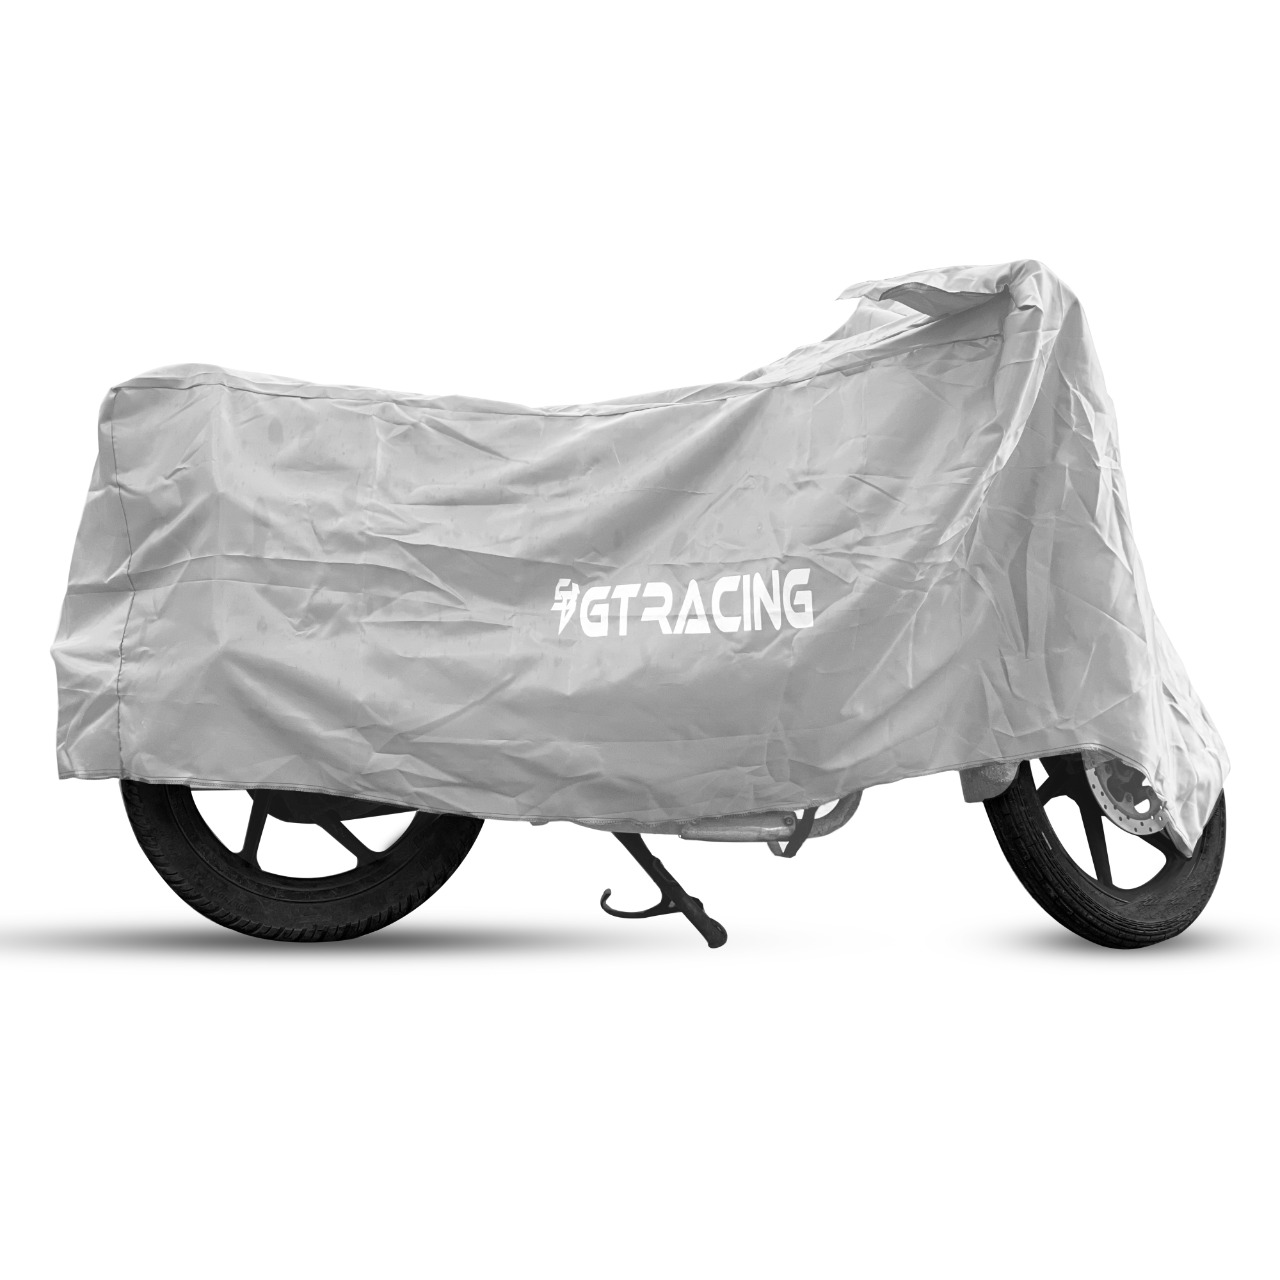 Steelbird Bike Cover GT Racing UV Protection Water-Resistant & Dustproof (Silver Matty), Bike Body Cover With Carry Bag (All Bikes Upto Cruiser Bikes)